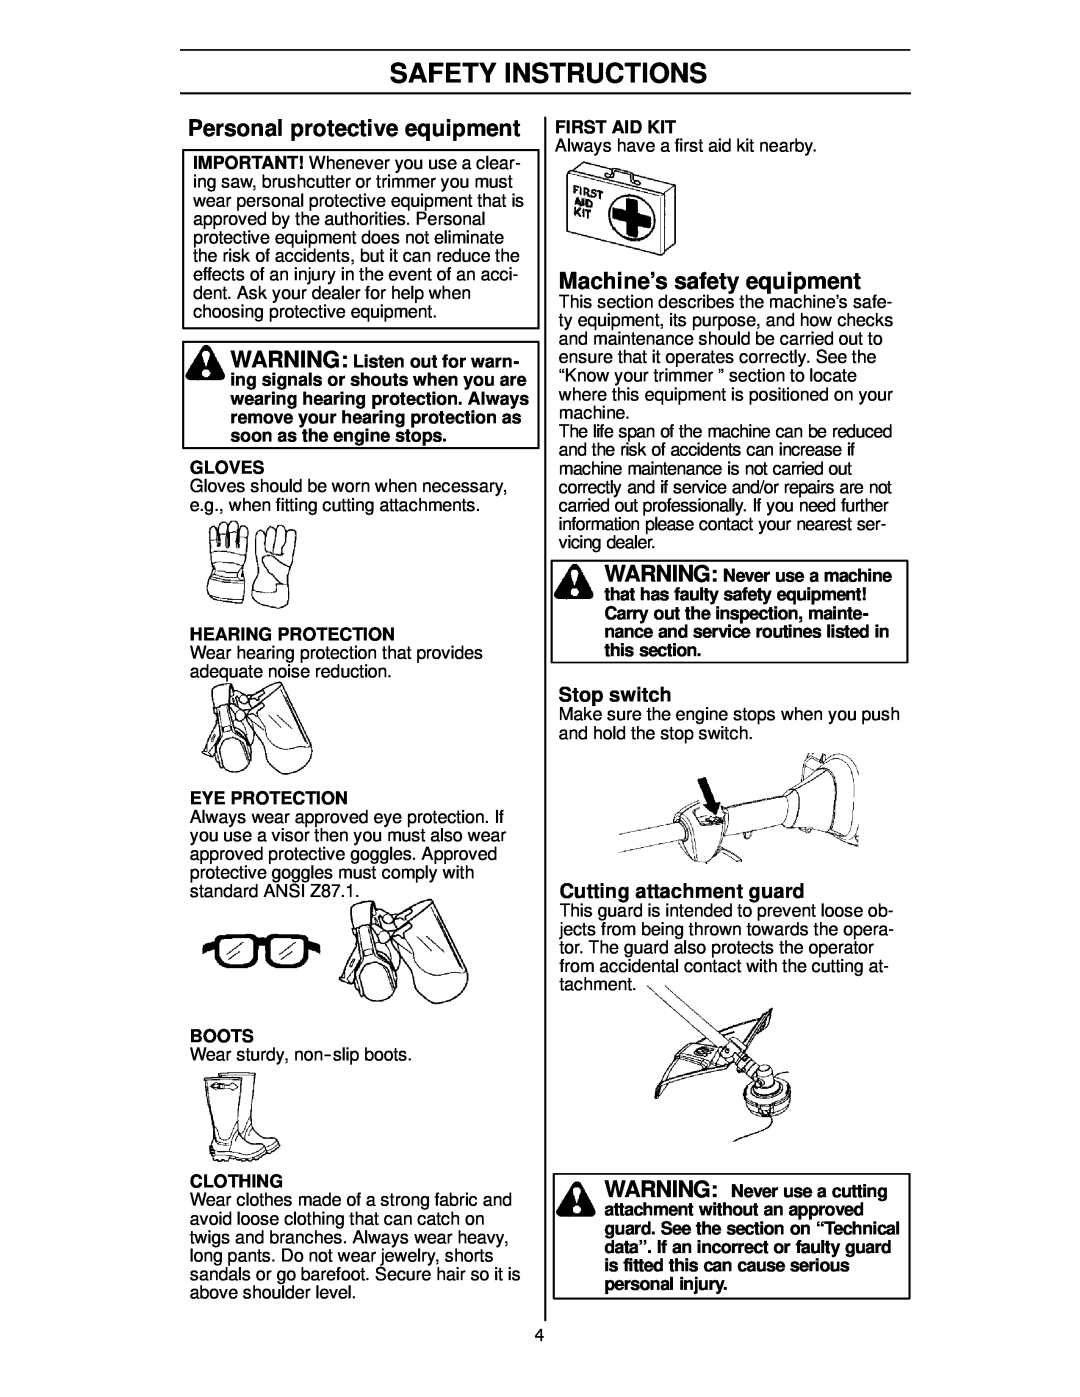 Husqvarna 124L Safety Instructions, Personal protective equipment, Machine’s safety equipment, Stop switch, Gloves, Boots 